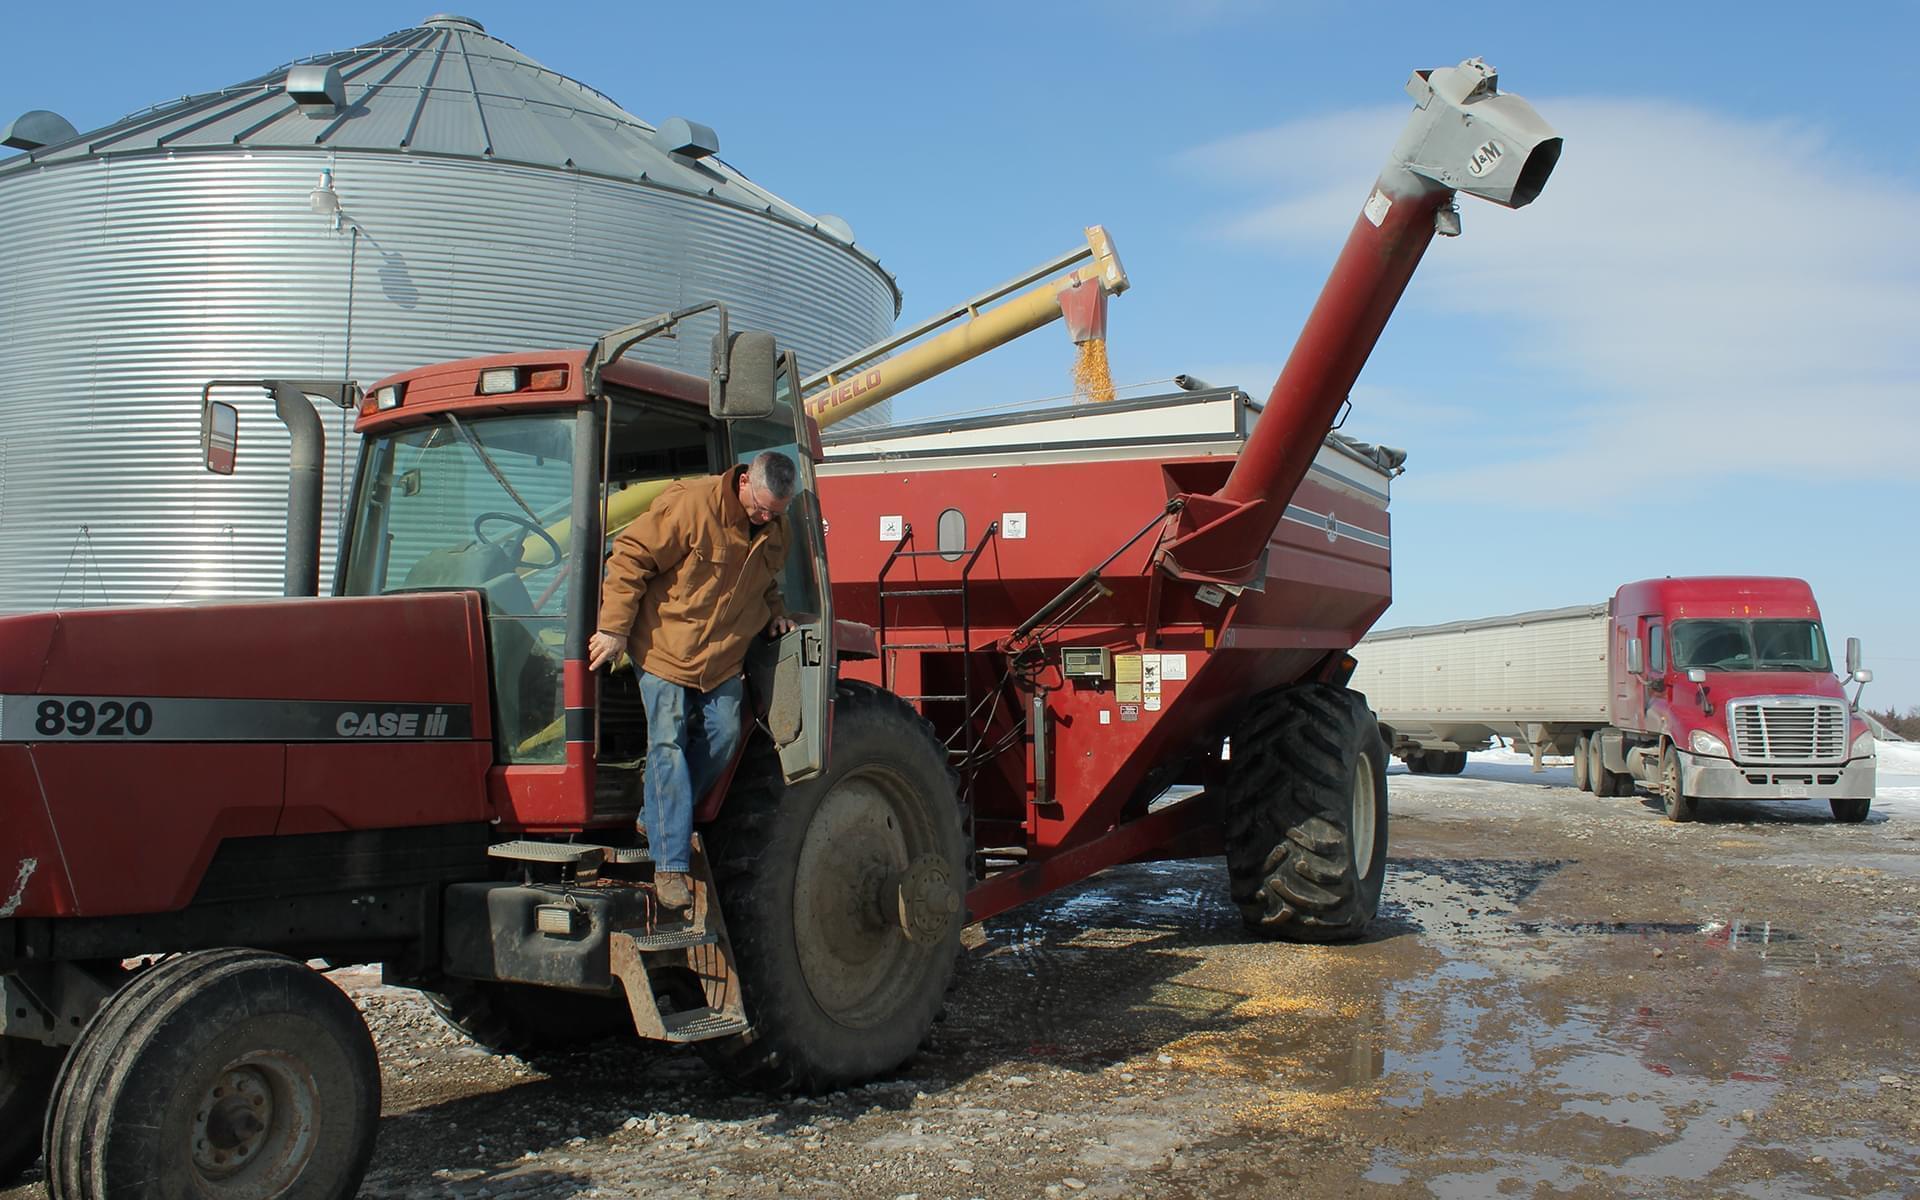 Ben Steffen fills a truck with corn that he'll haul to a grain elevator 80 miles away. A silver lining of this long winter is that Steffen can earn a premium for delivering while other farmers are stuck on snow-packed roads.